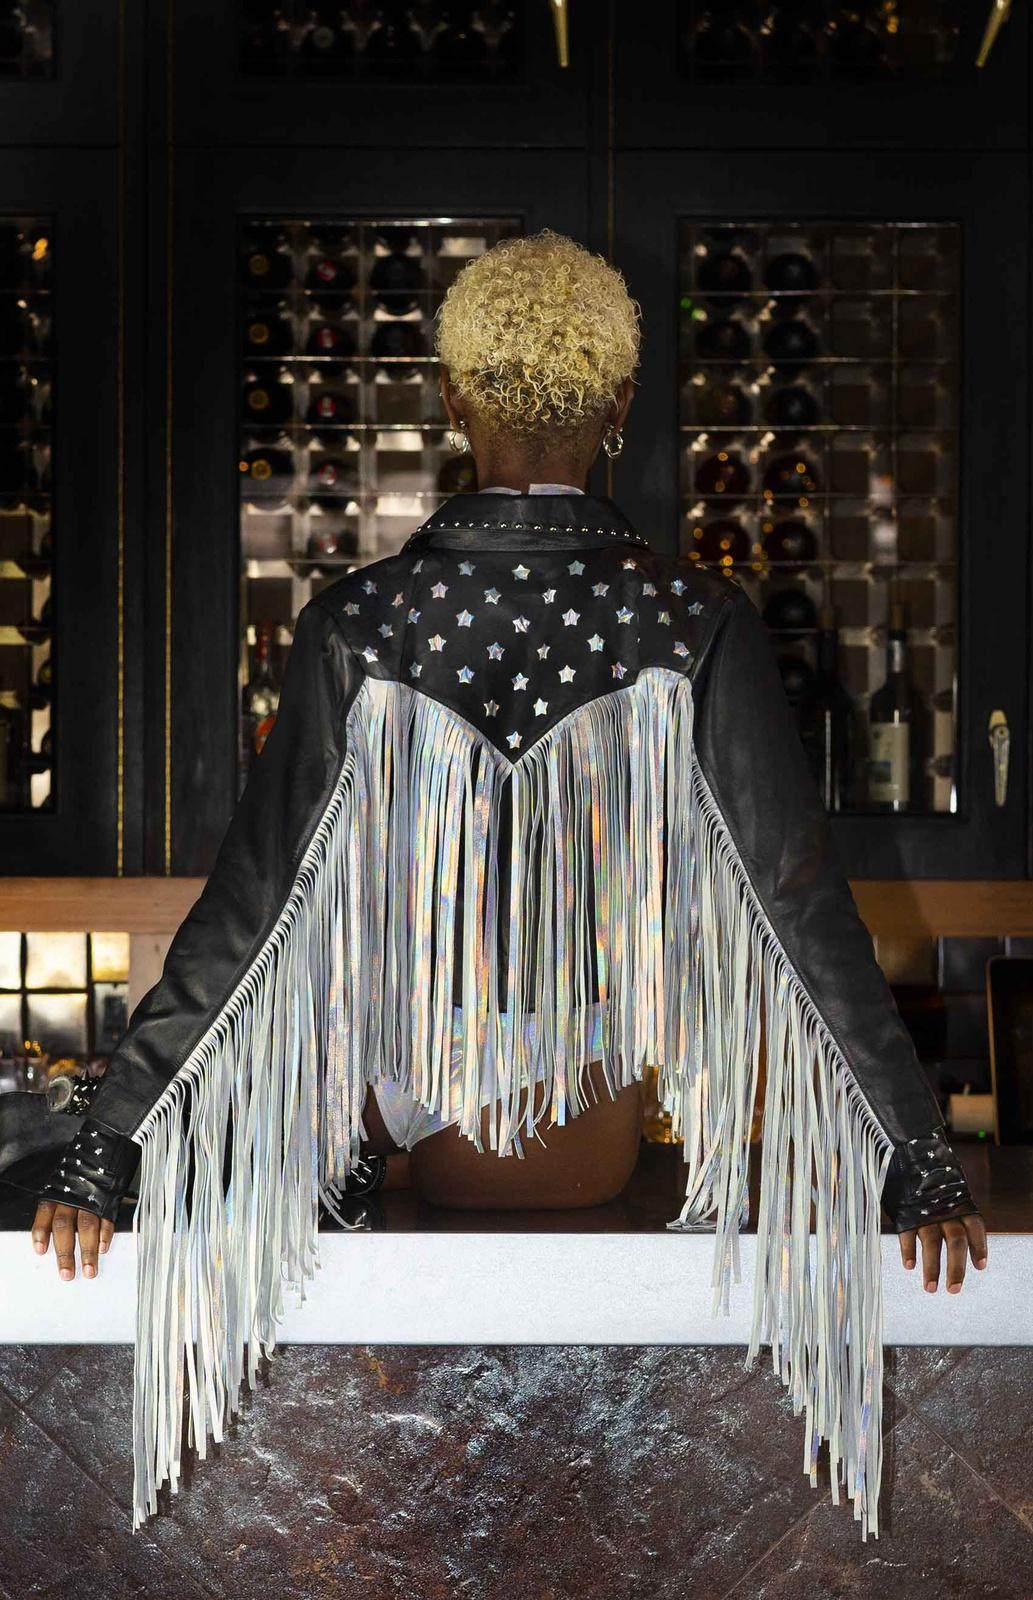 Holographic Silver leather fringe jacket from Love Khaos Festival Clothing brand.